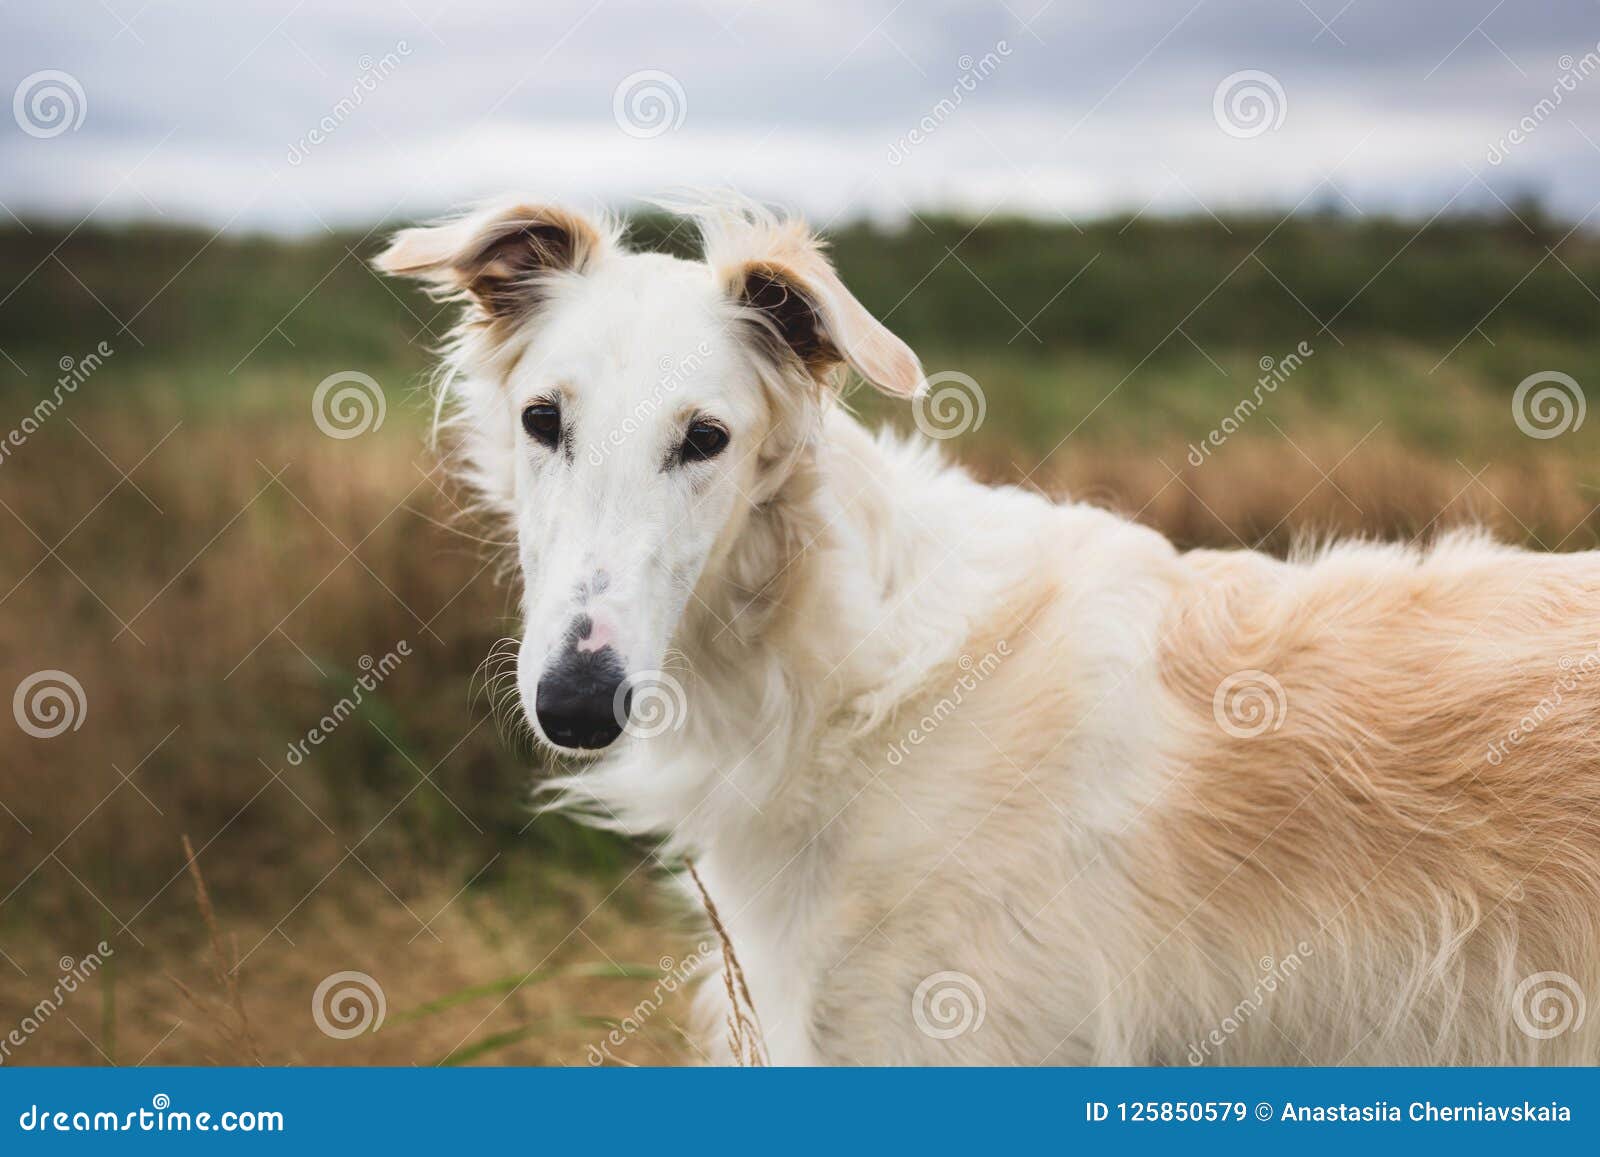 Close Up Portrait Of Elegant And Beautiful Russian Borzoi Dog In The Field Stock Image Image Of Companion Meadow 125850579